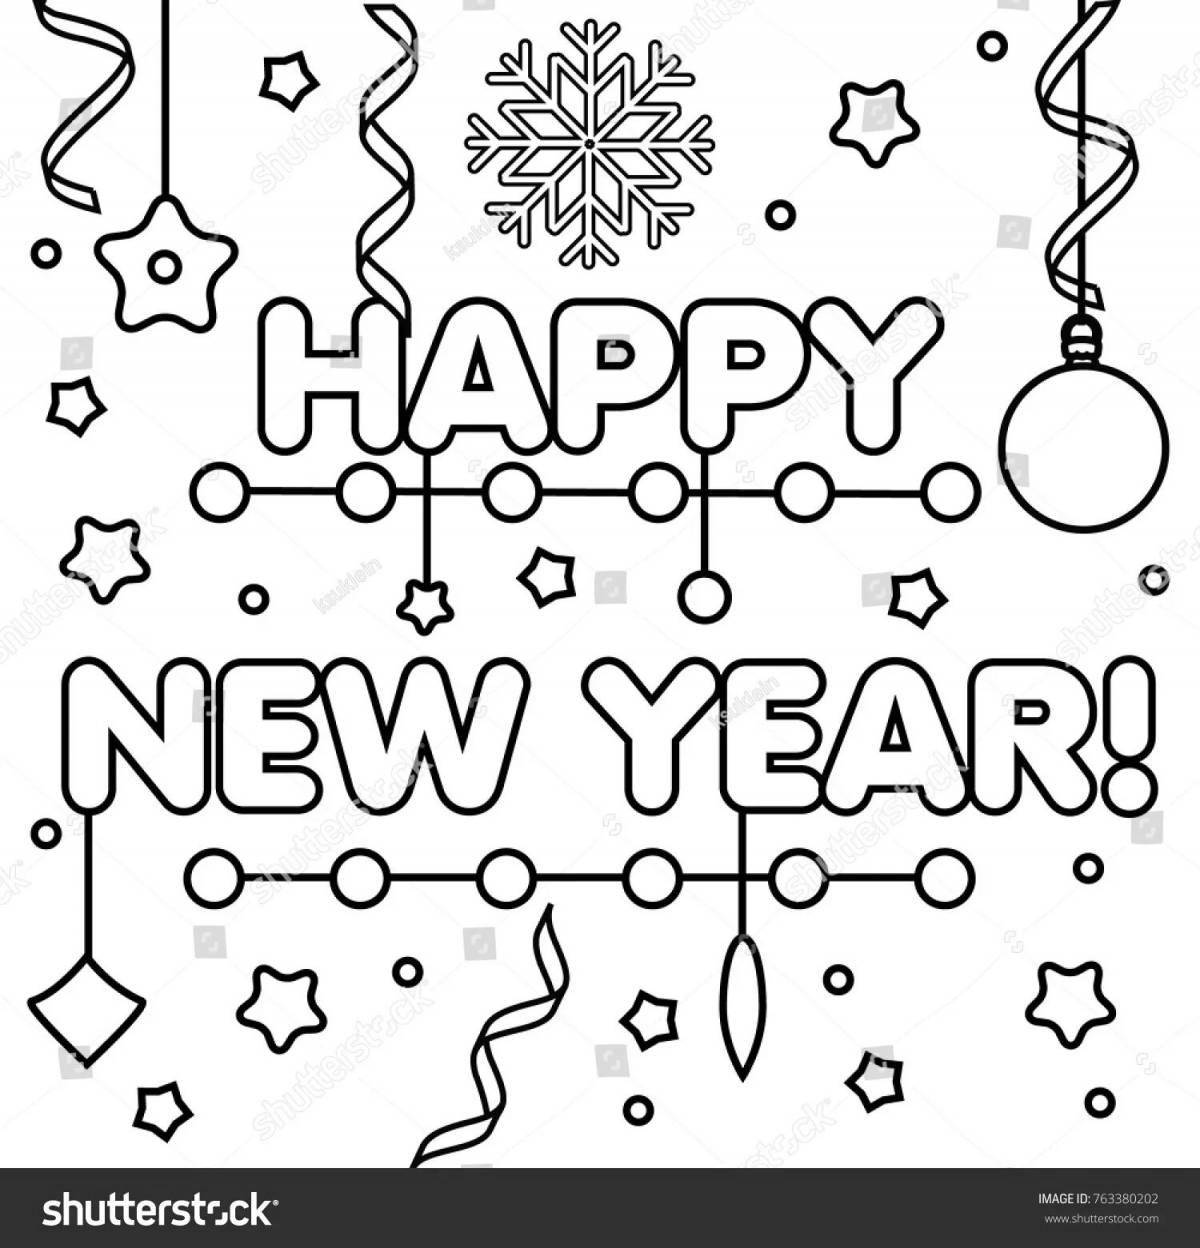 Playful happy new year card